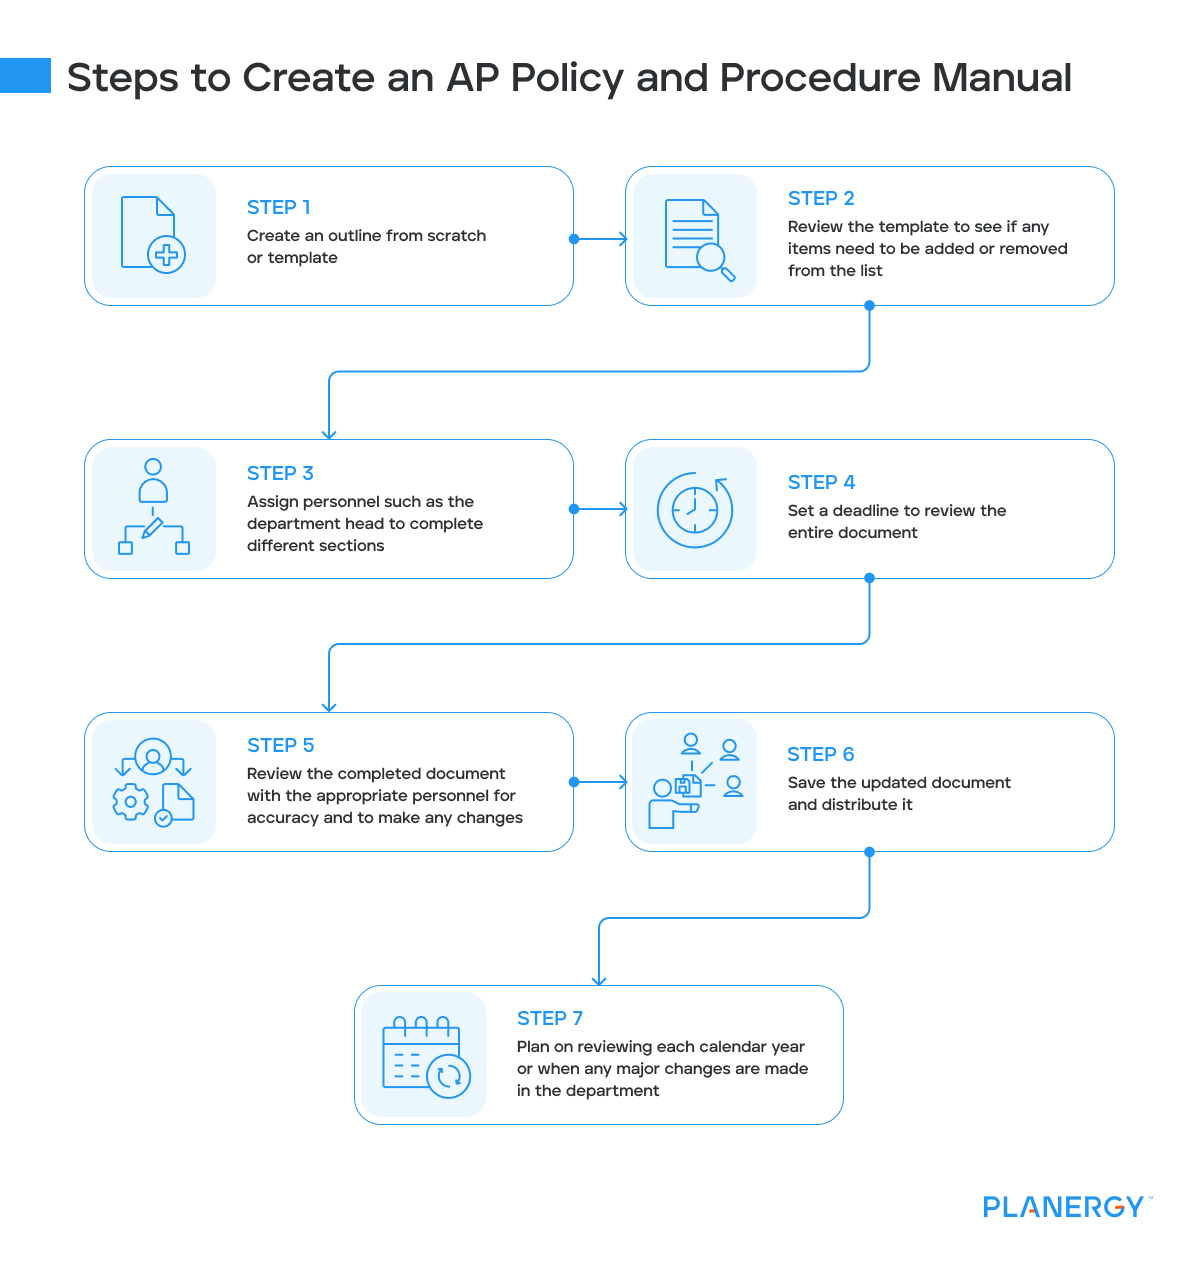 Steps to Create an AP Policy and procedure manual